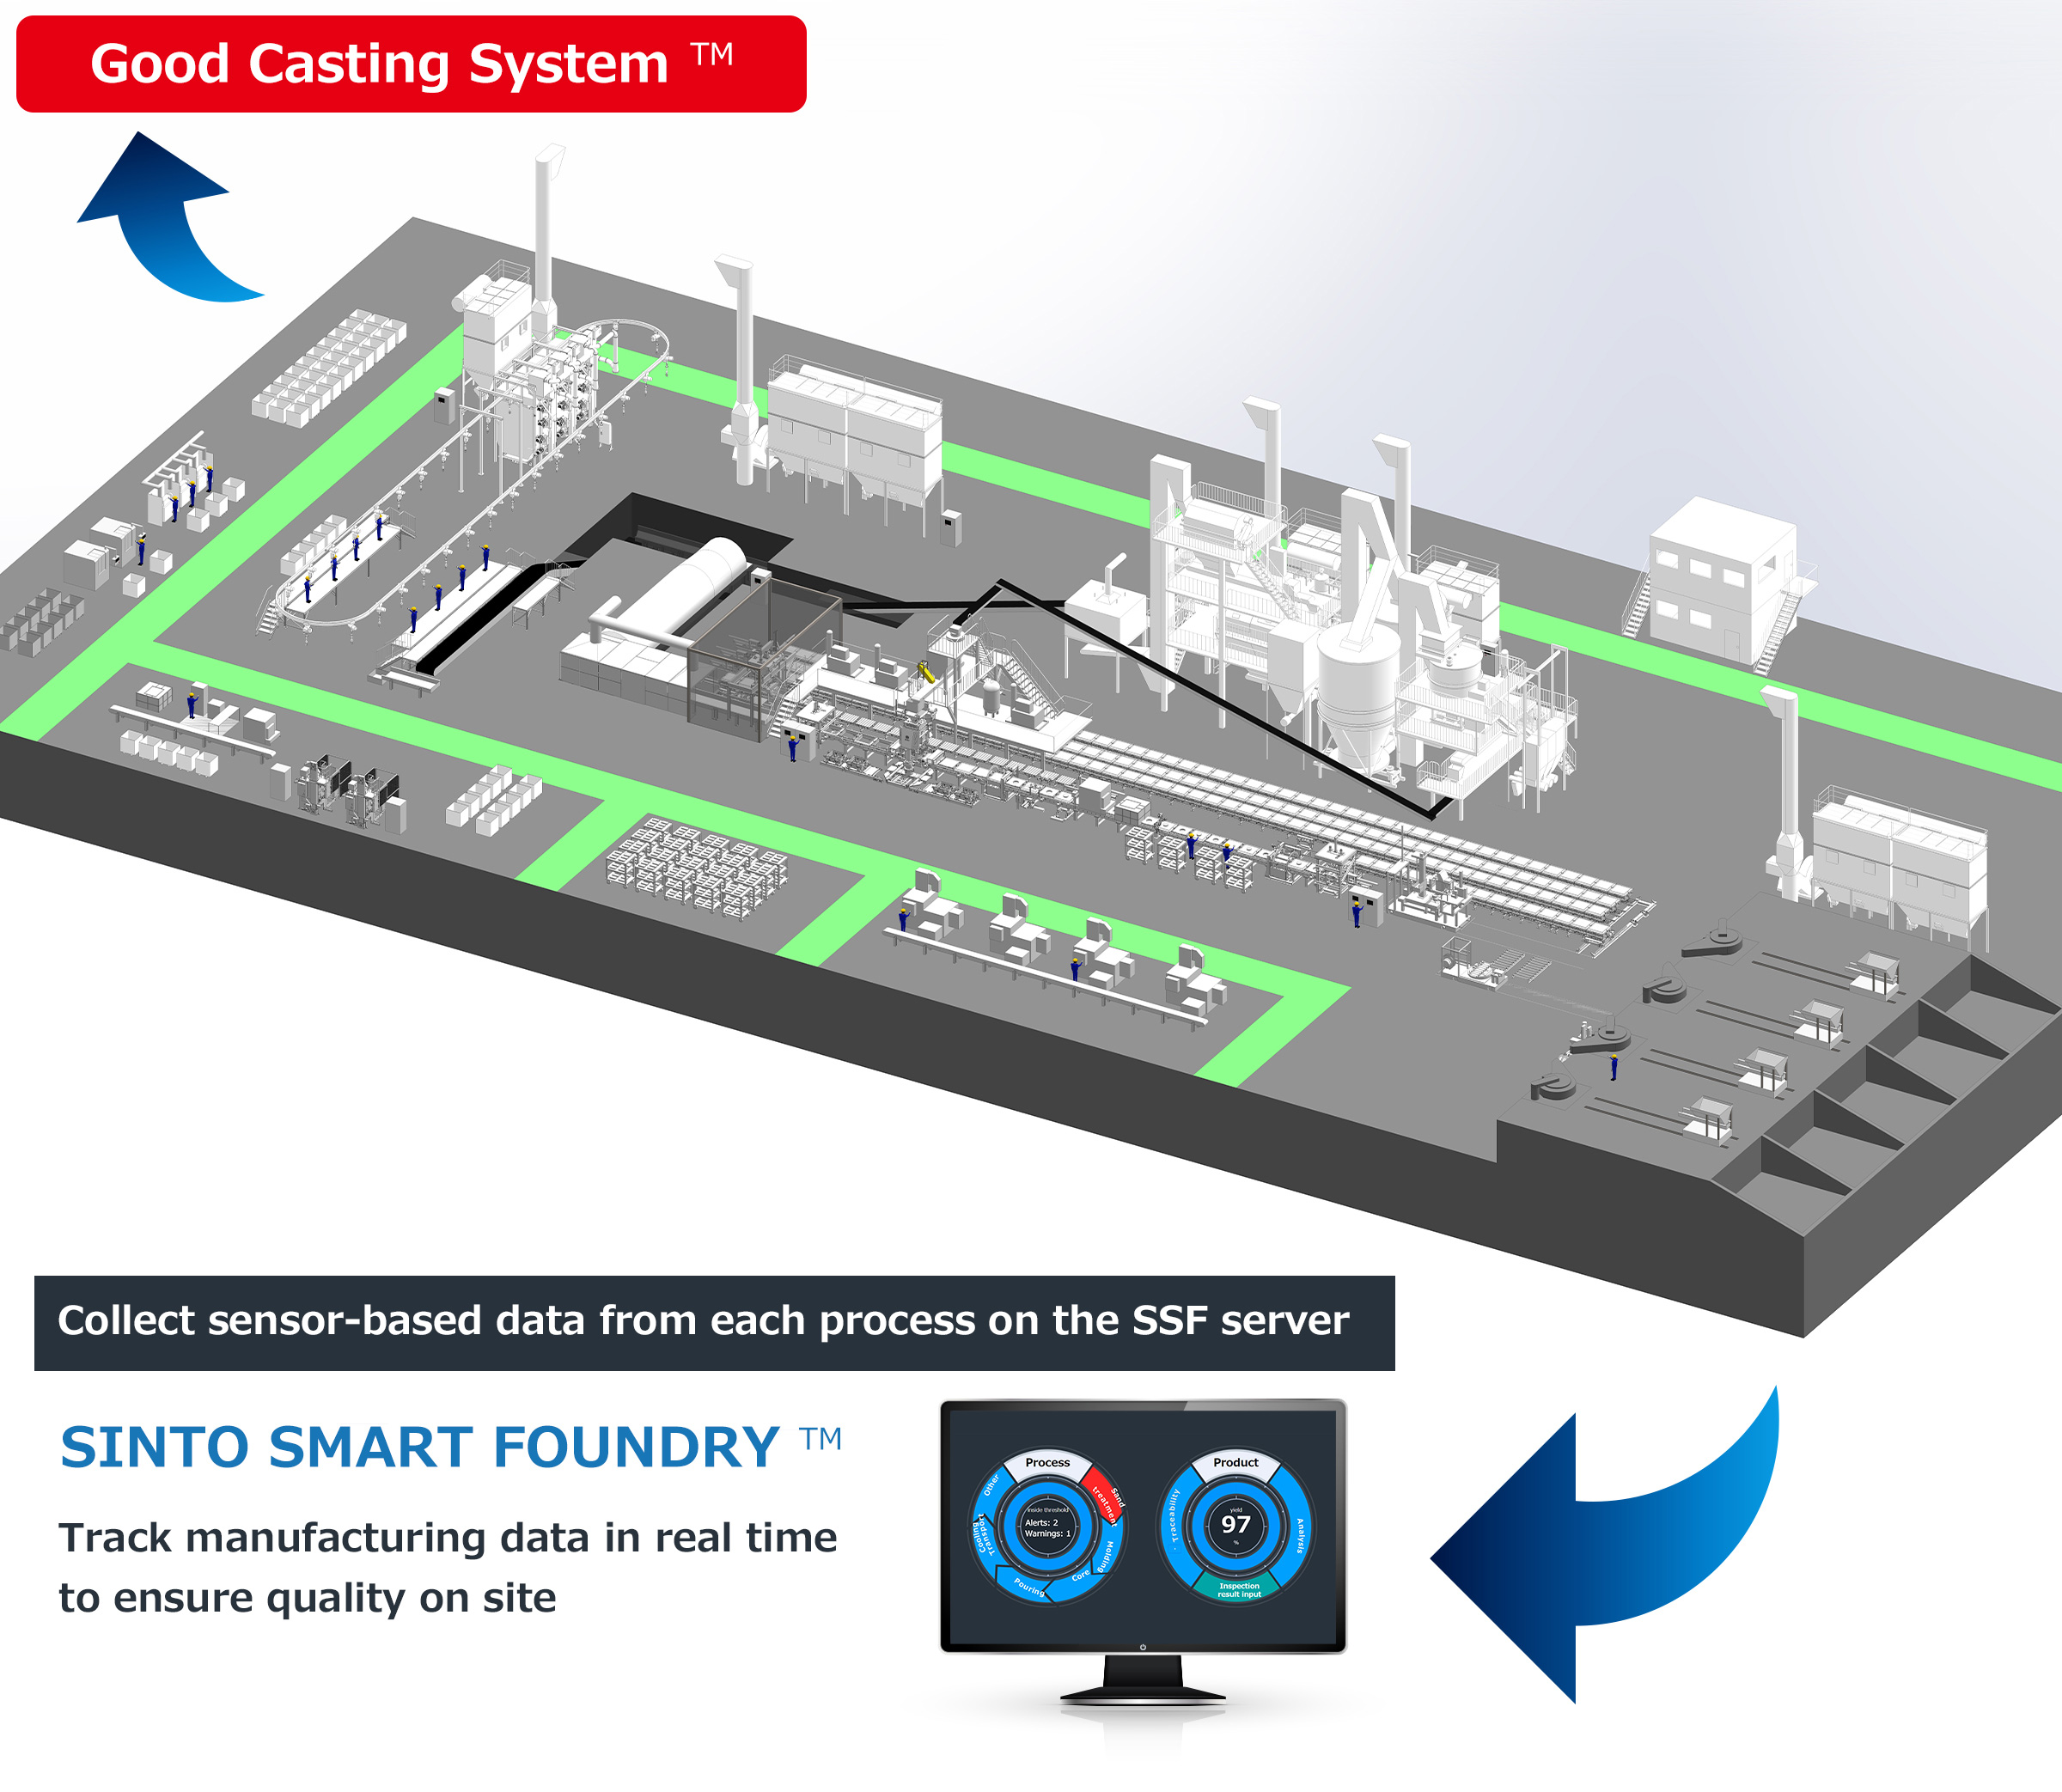 Our Good Casting System™ uses net shaping and thinning/weight reduction to achieve better casting production